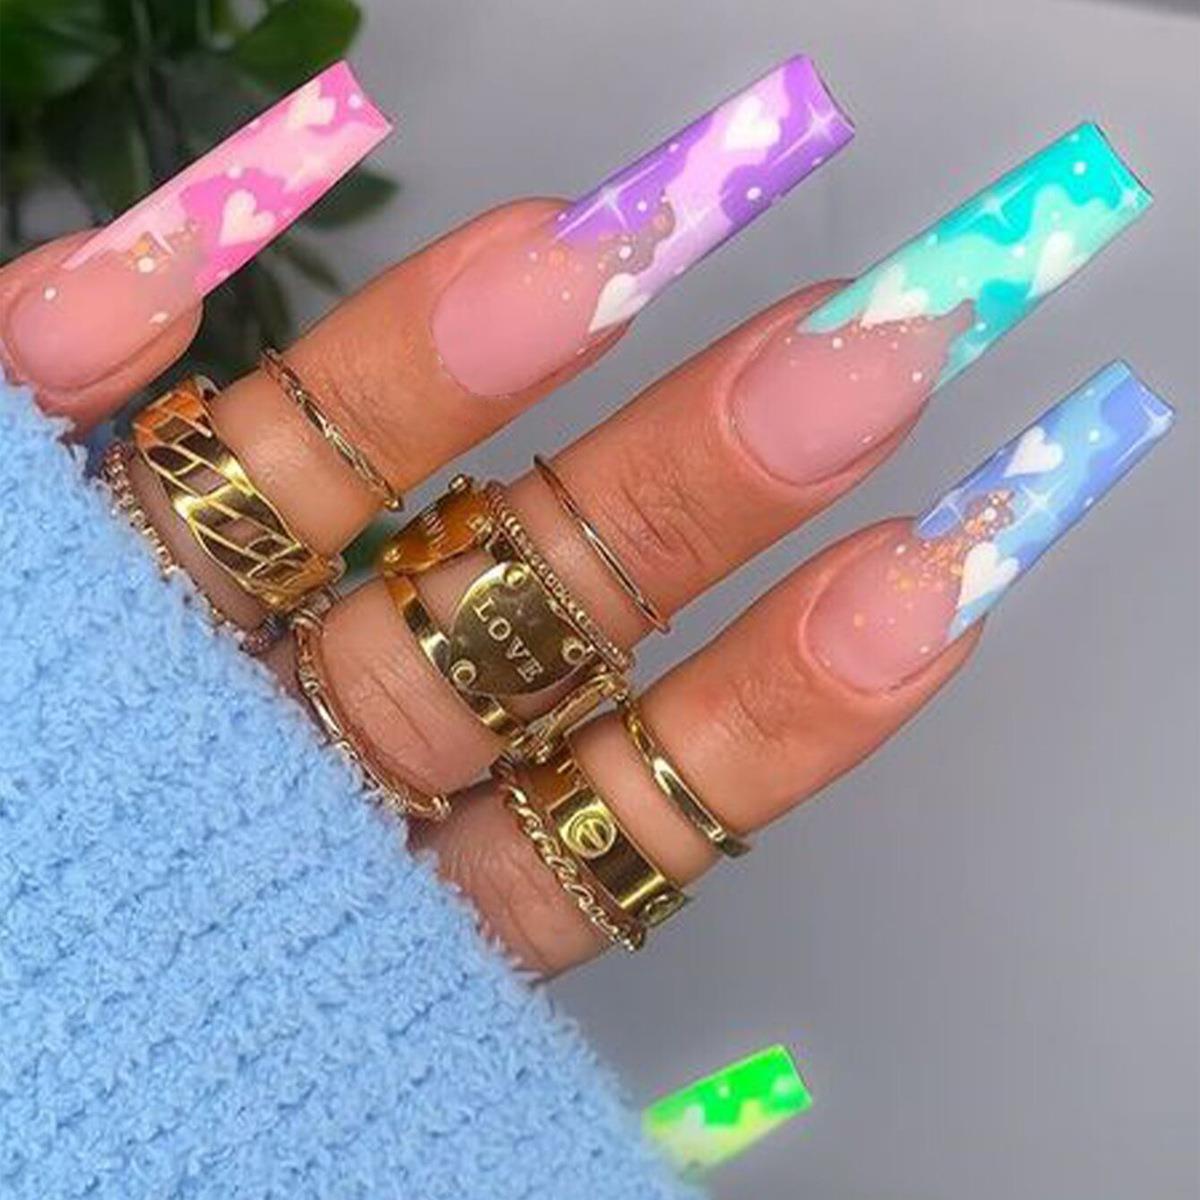 3D Fake Nails Accessories Rainbow Heart With Glitters Long French Coffin Tips Faux Ongles Press på akryl falske negleforsyninger